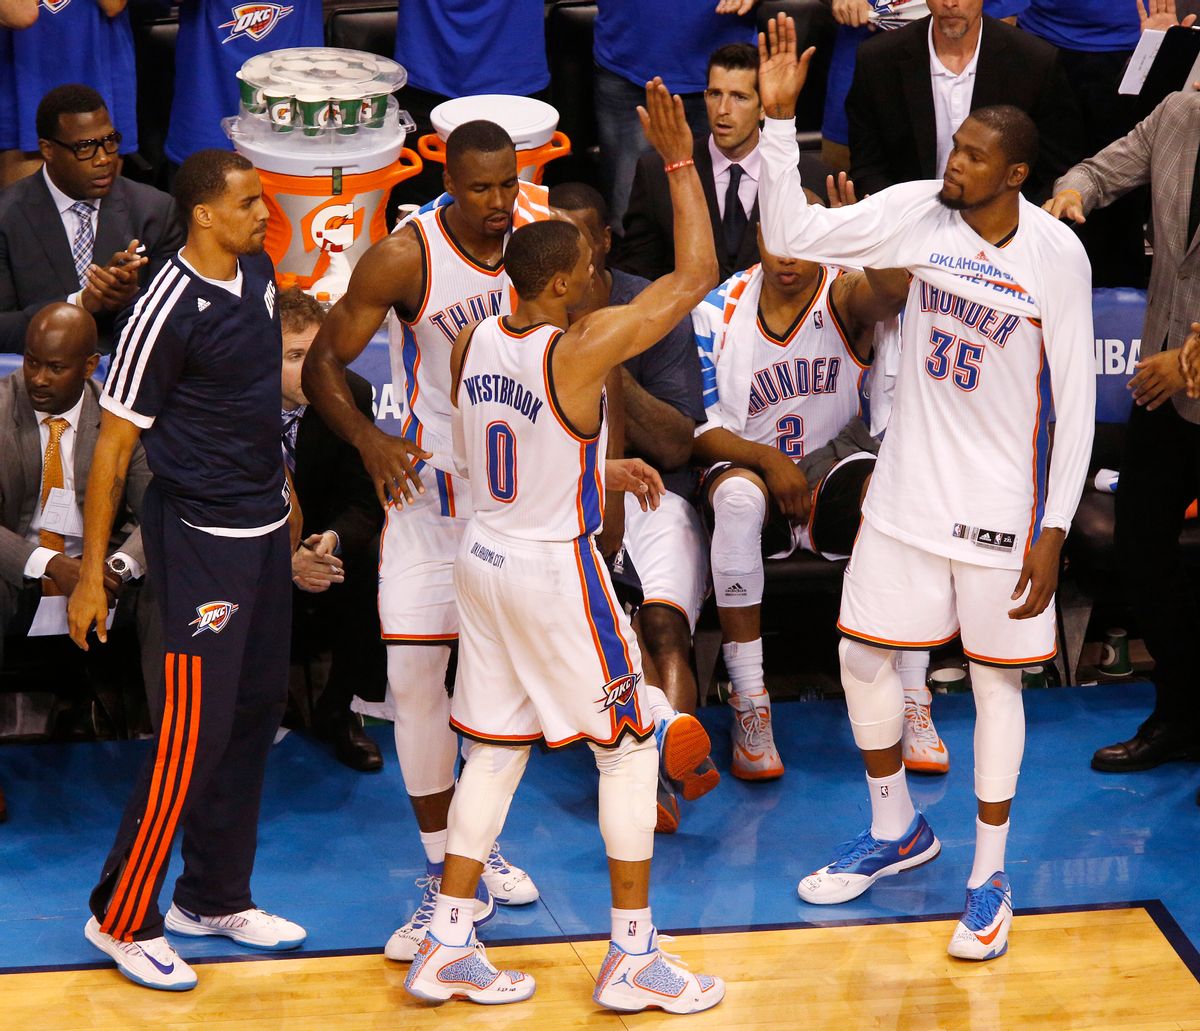 Oklahoma City Thunder guard Russell Westbrook (0) is greeted by teammates, guard Thabo Sefolosha (25), forward Serge Ibaka (9), and forward Kevin Durant (35) after being pulled in the last moments of Game 4 of the Western Conference finals NBA basketball playoff series in Oklahoma City, Tuesday, May 27, 2014. (AP Photo/Garett Fisbeck) (AP)